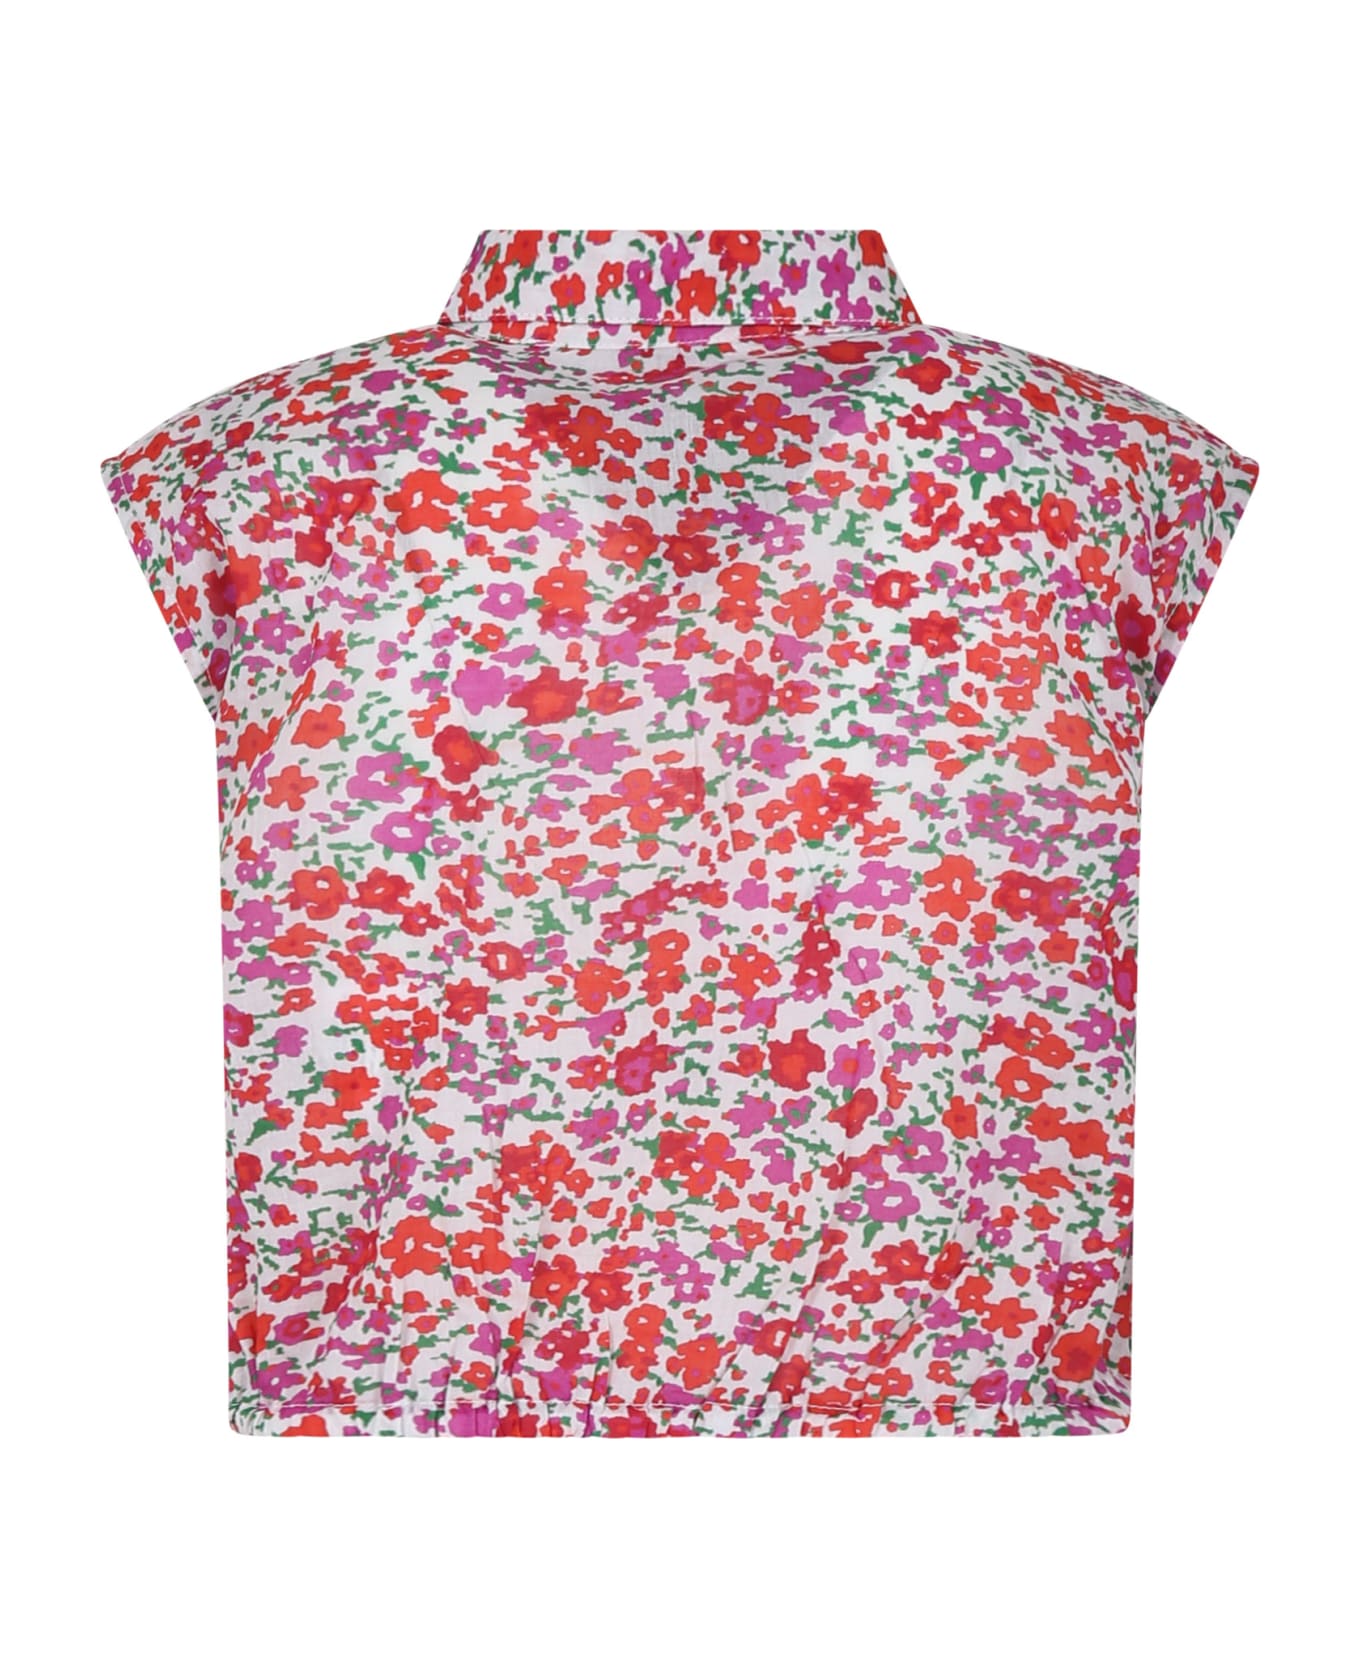 Philosophy di Lorenzo Serafini Kids White Top For Girl With Flowers - Multicolor トップス